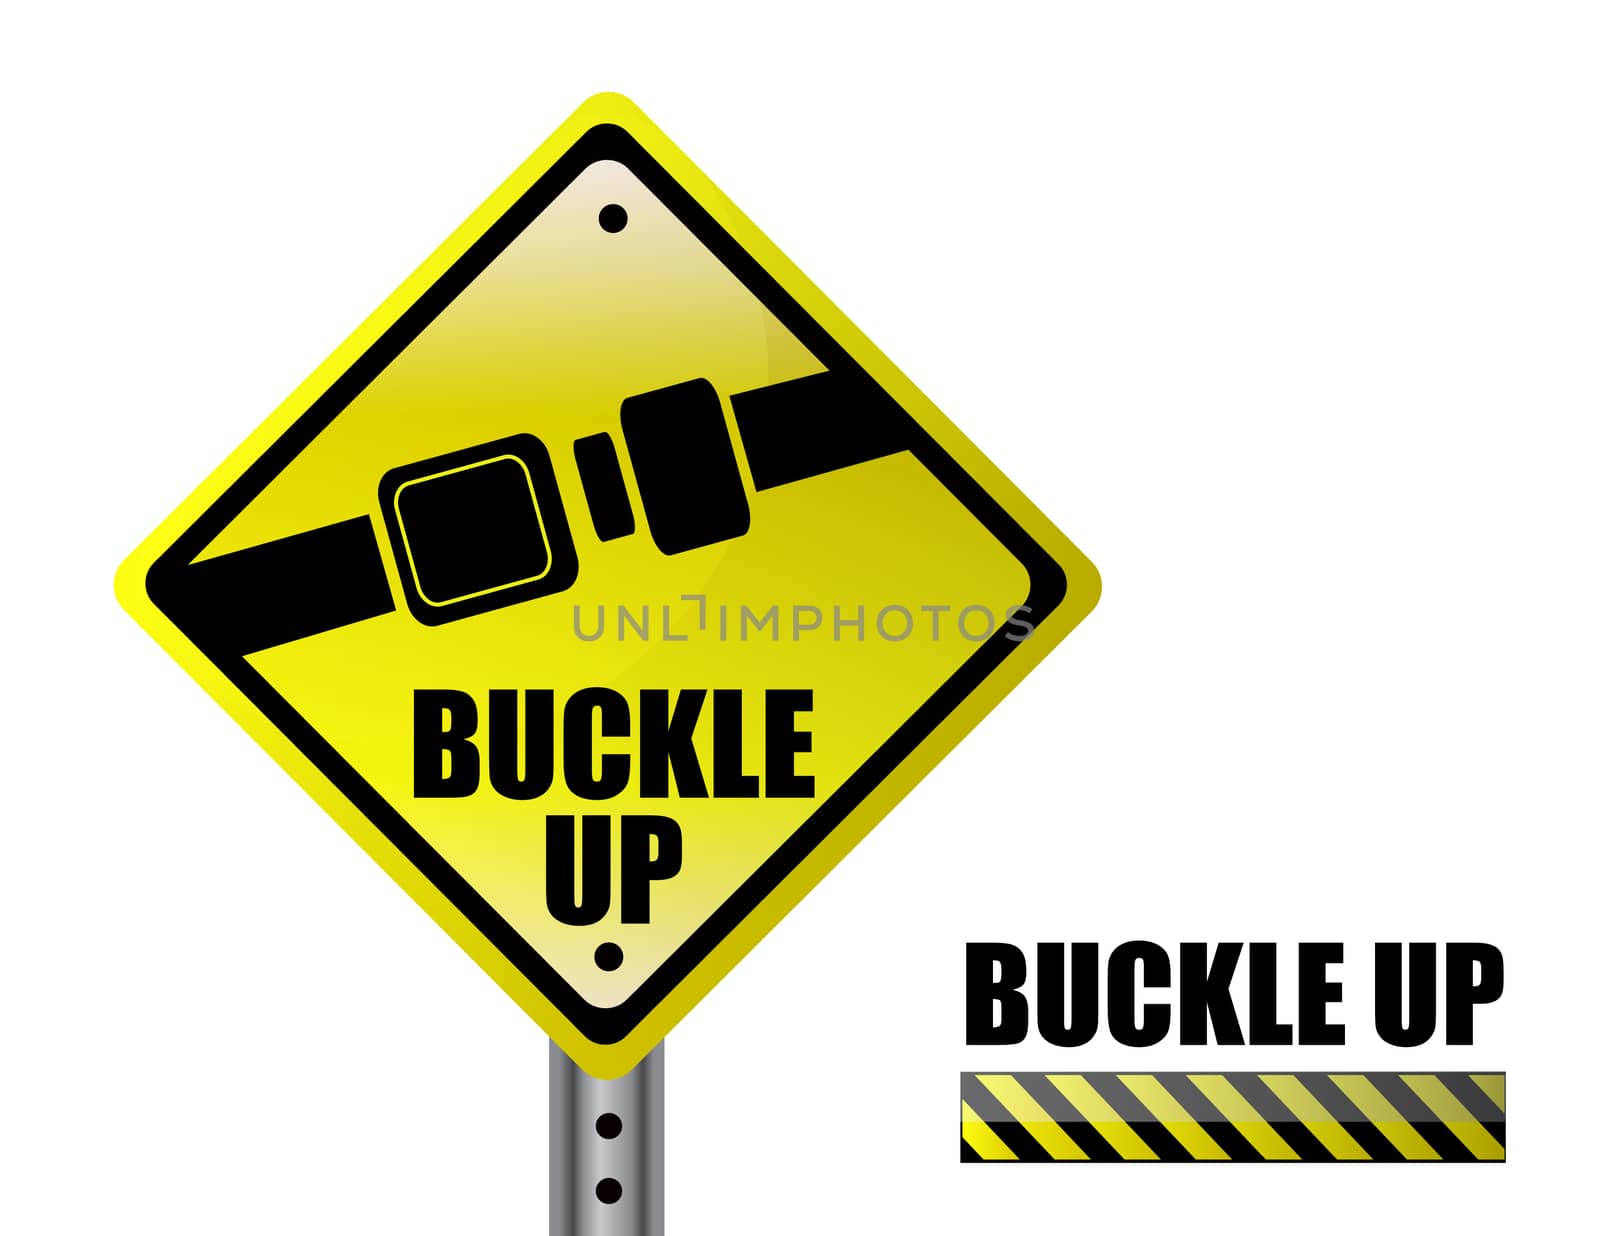 Detail metal buckle up street sign isolated over a white background